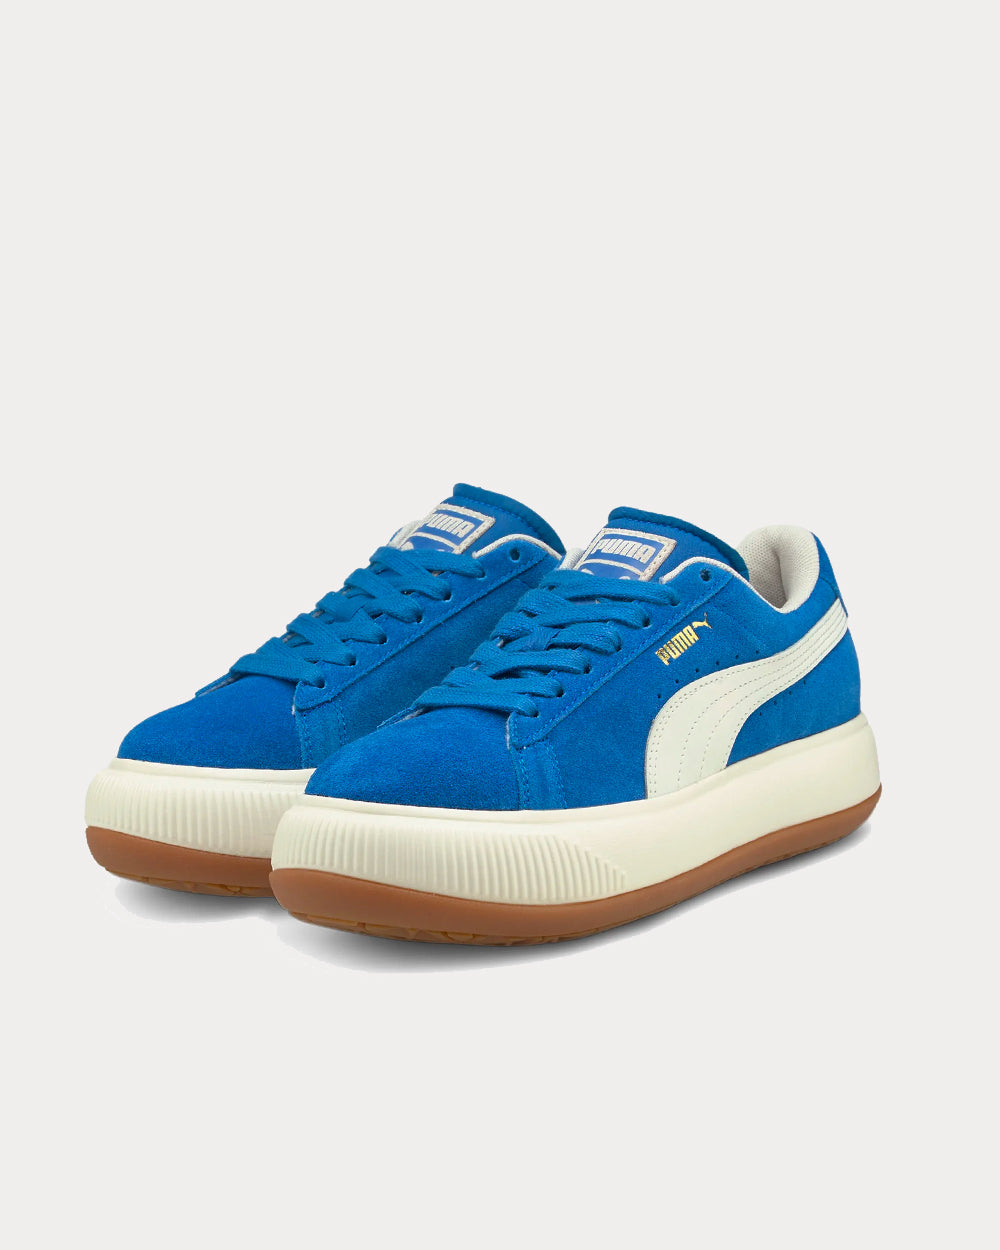 Puma - Mayu UP Blue Low Top Sneakers